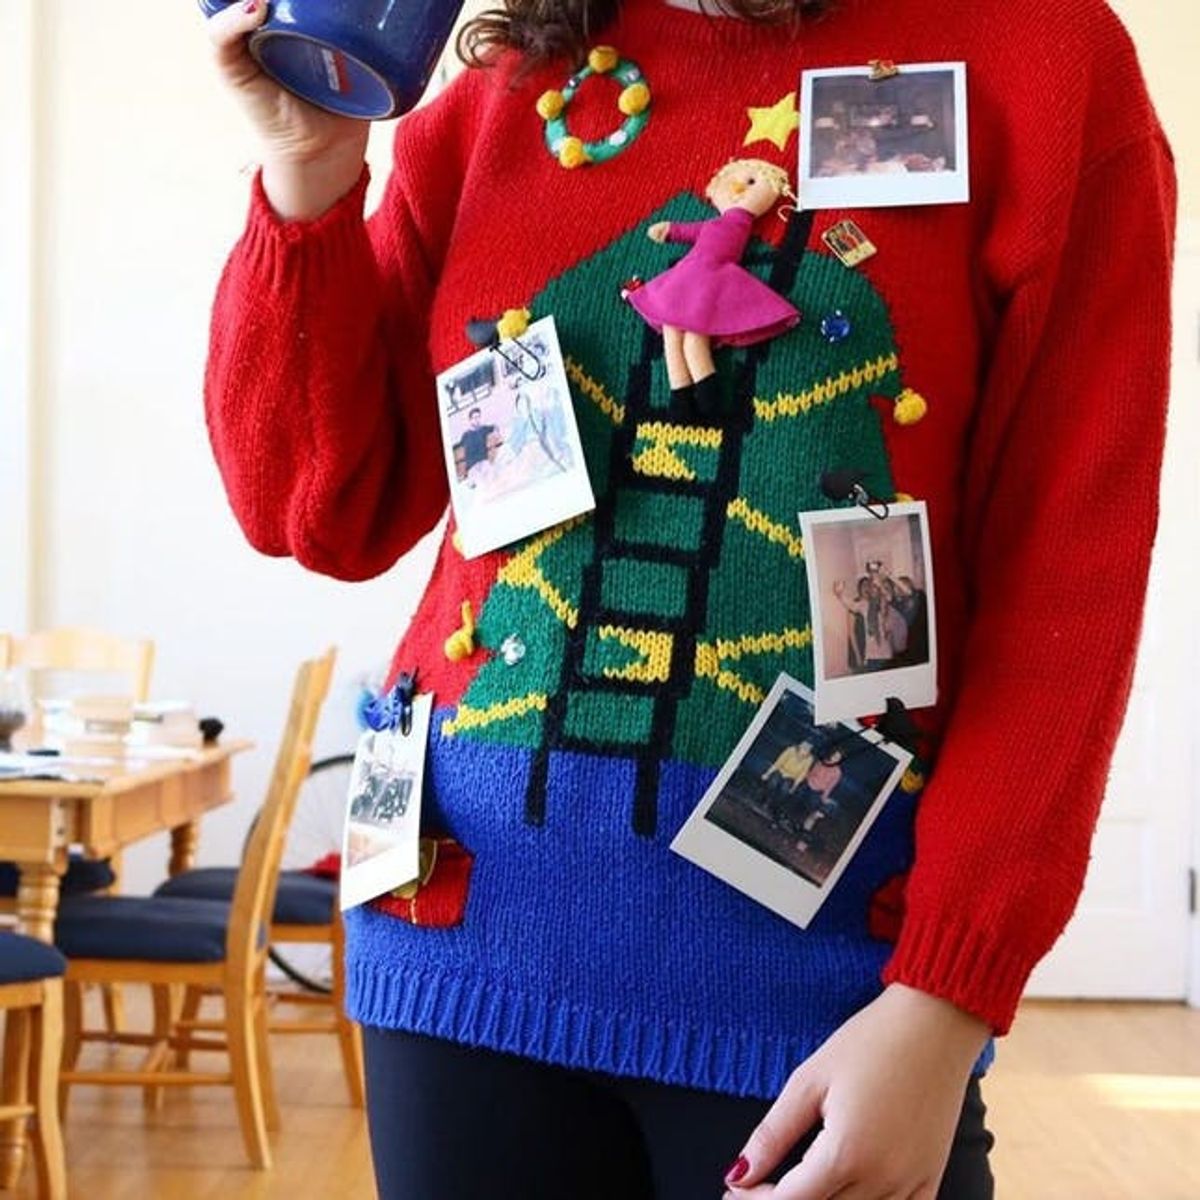 18 Instagrammers Already WINNING the Ugly Sweater Game